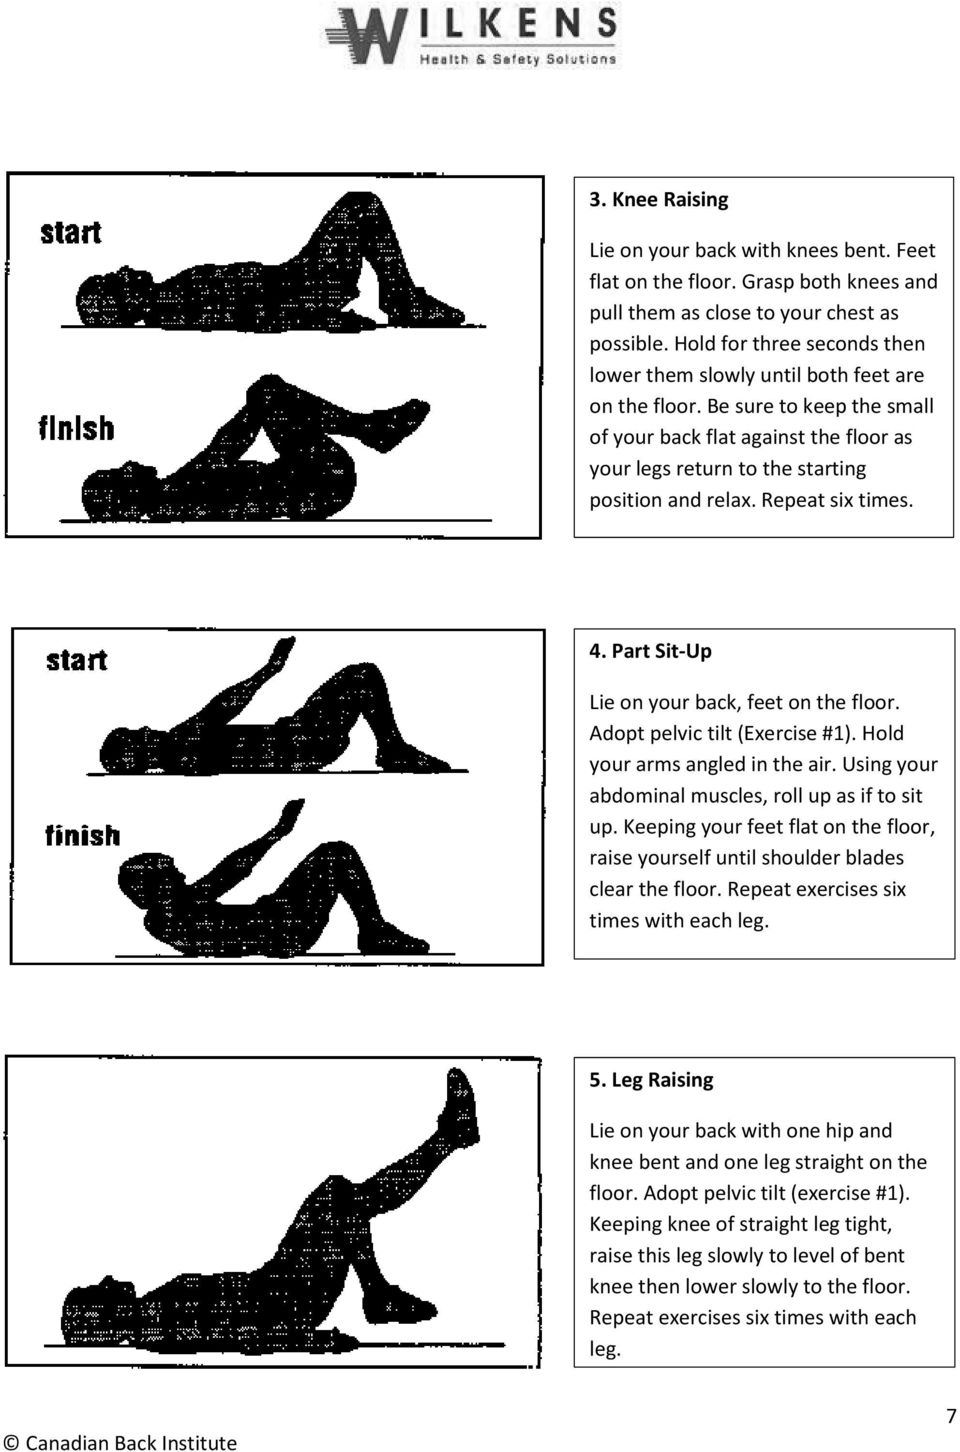 Repeat six times. 4. Part Sit-Up Lie on your back, feet on the floor. Adopt pelvic tilt (Exercise #1). Hold your arms angled in the air. Using your abdominal muscles, roll up as if to sit up.